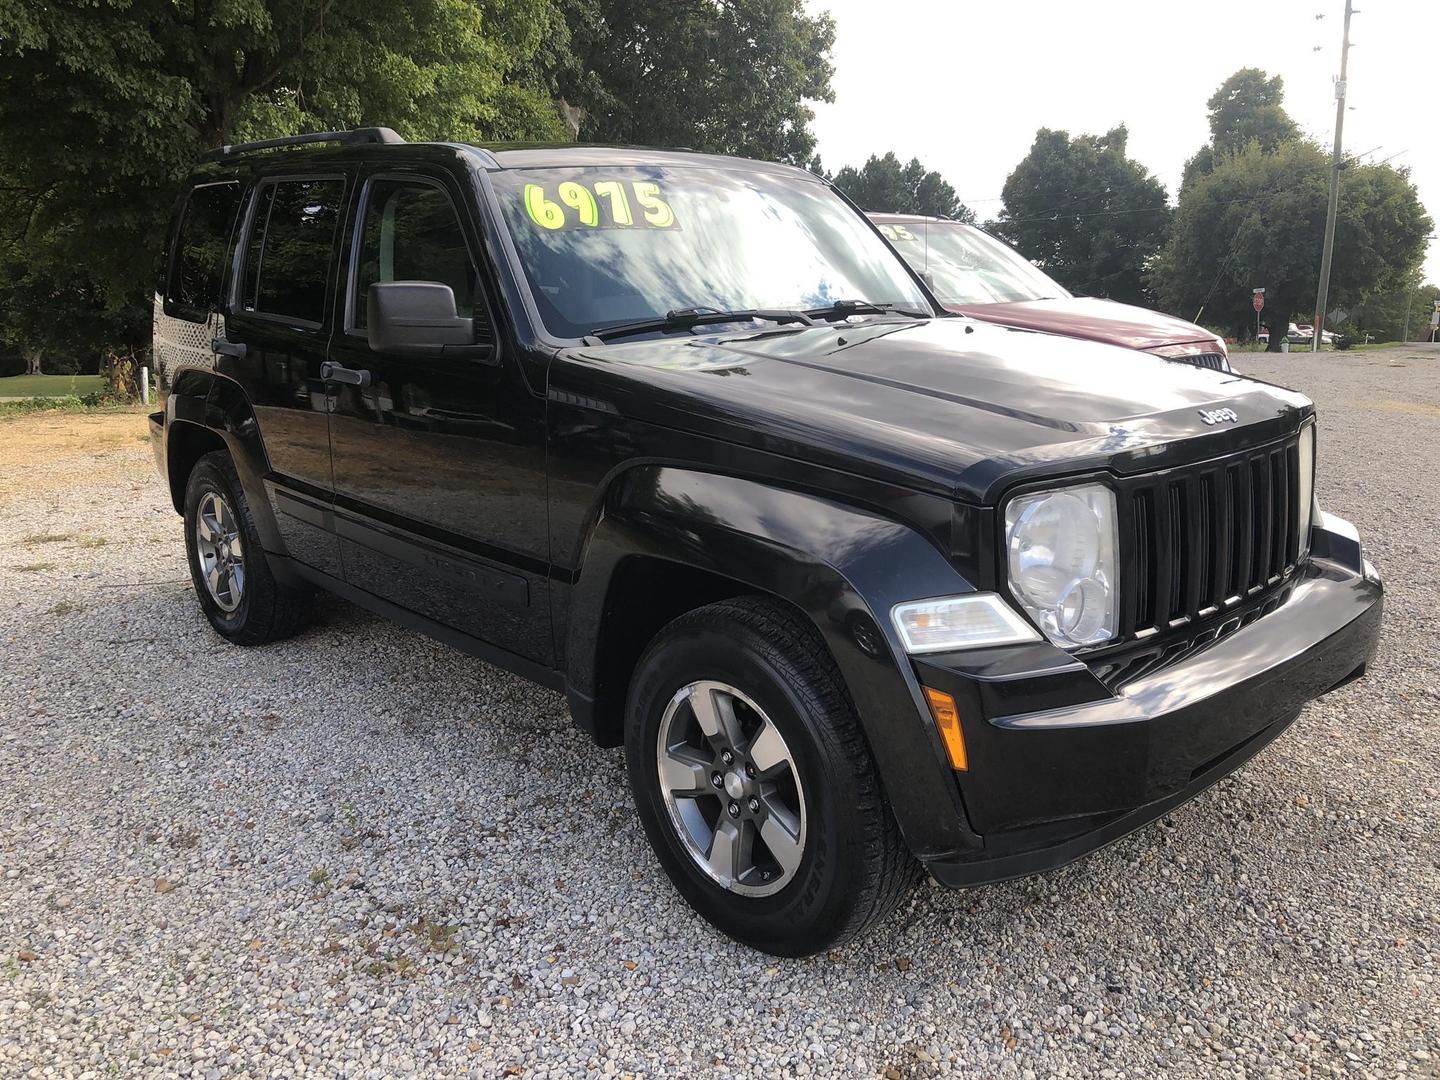 USED JEEP LIBERTY 2008 for sale in Wingo, KY Williams